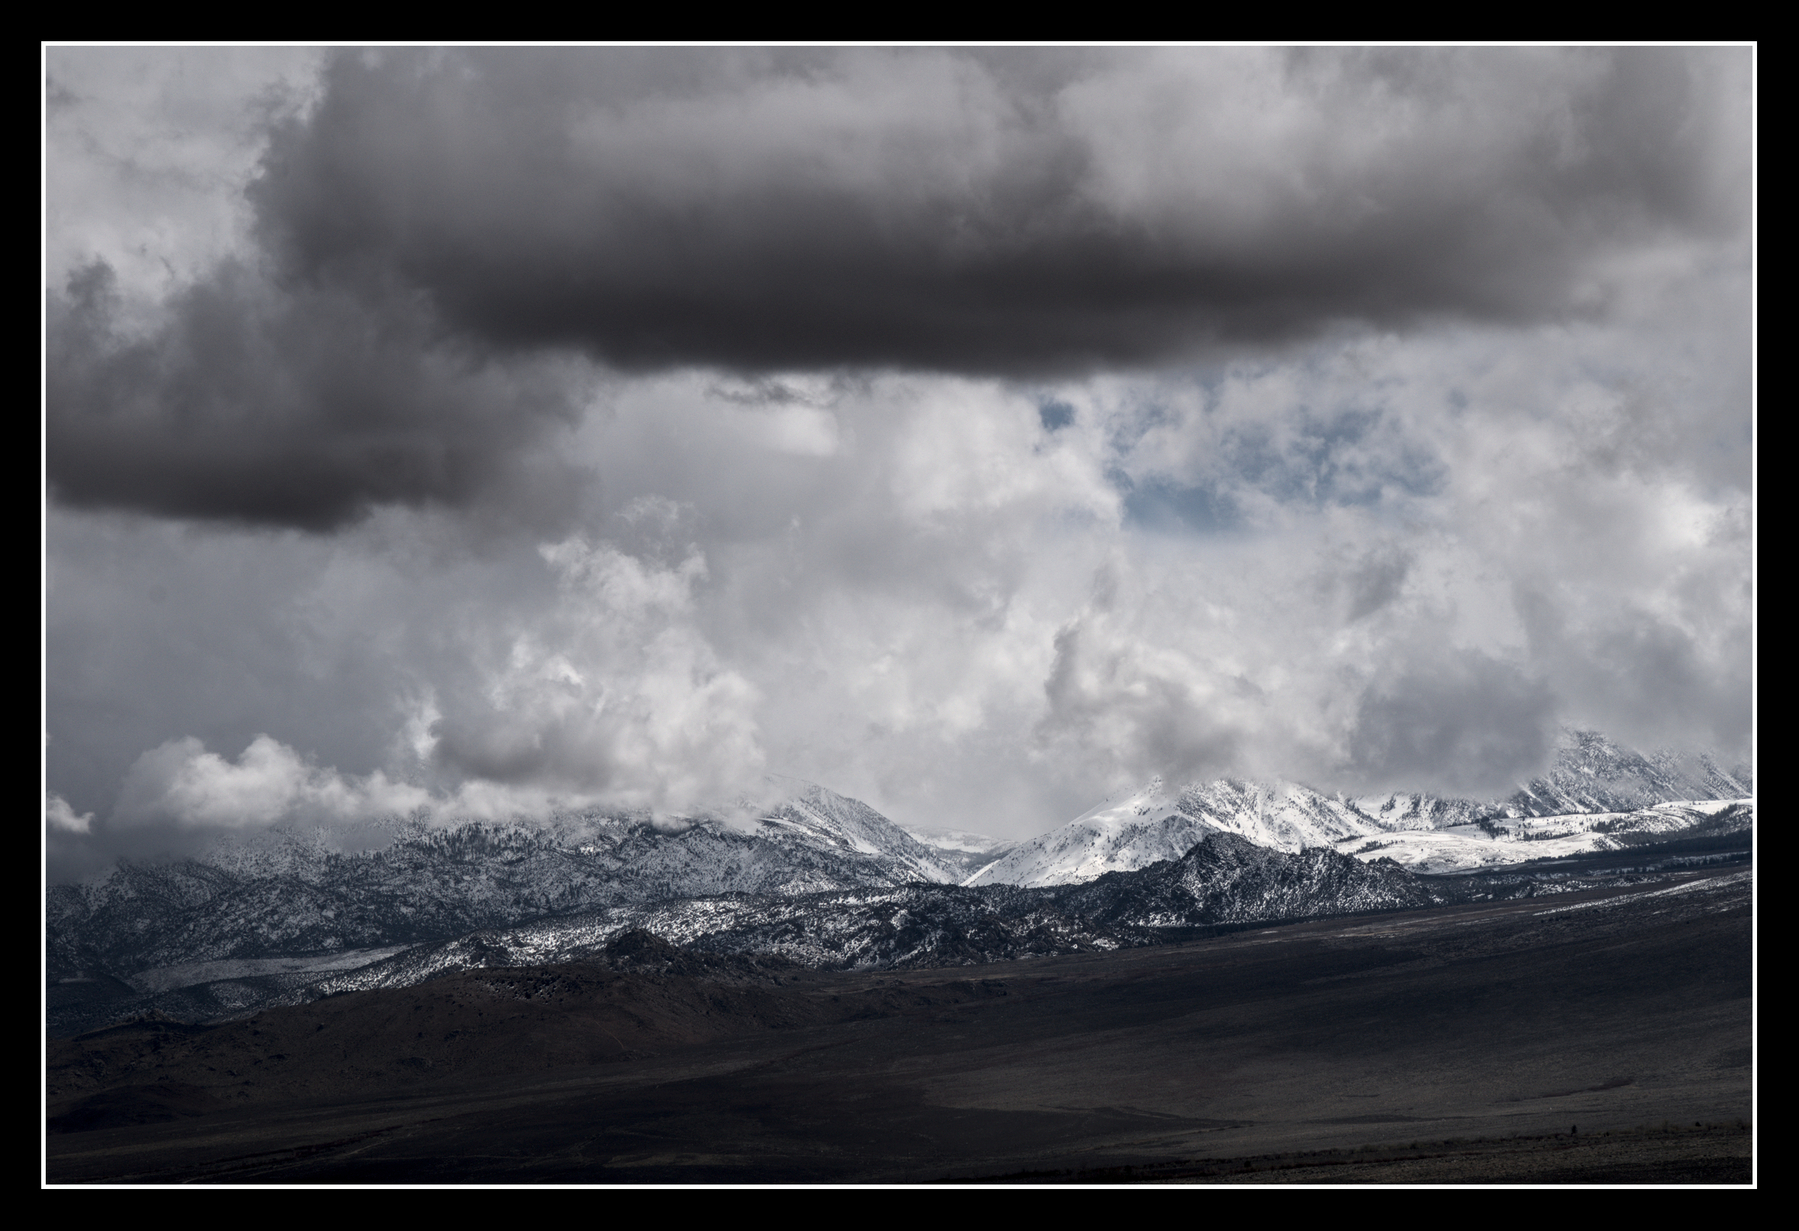 A variety of clouds, some light, some dark, over a low range of mountains.